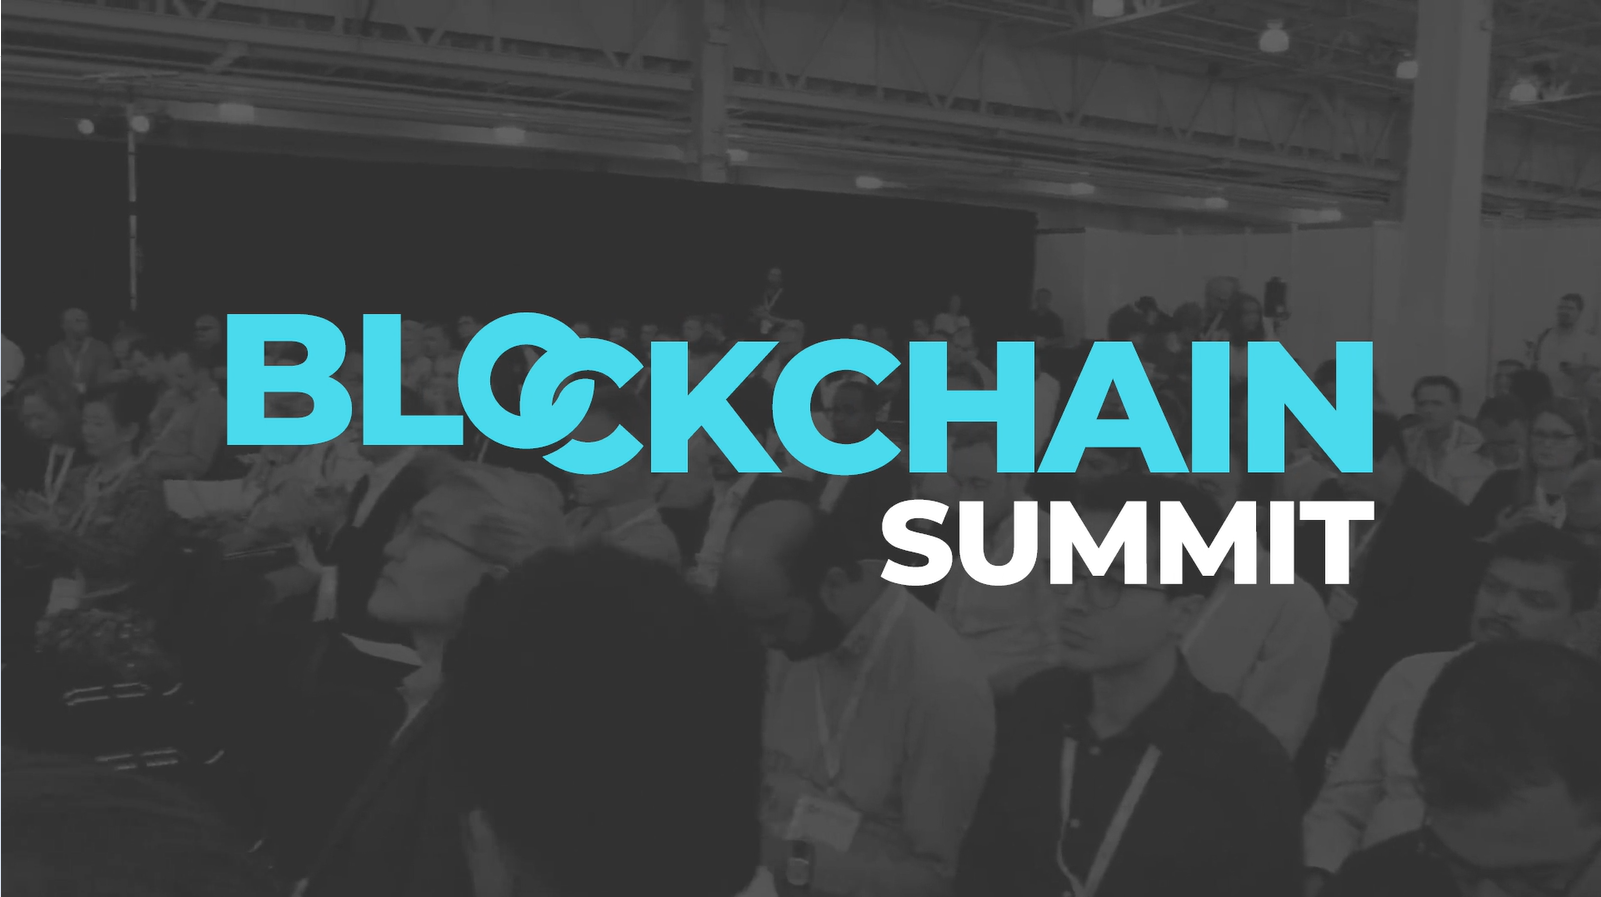 Details of Blockchain Summit London You Should Know